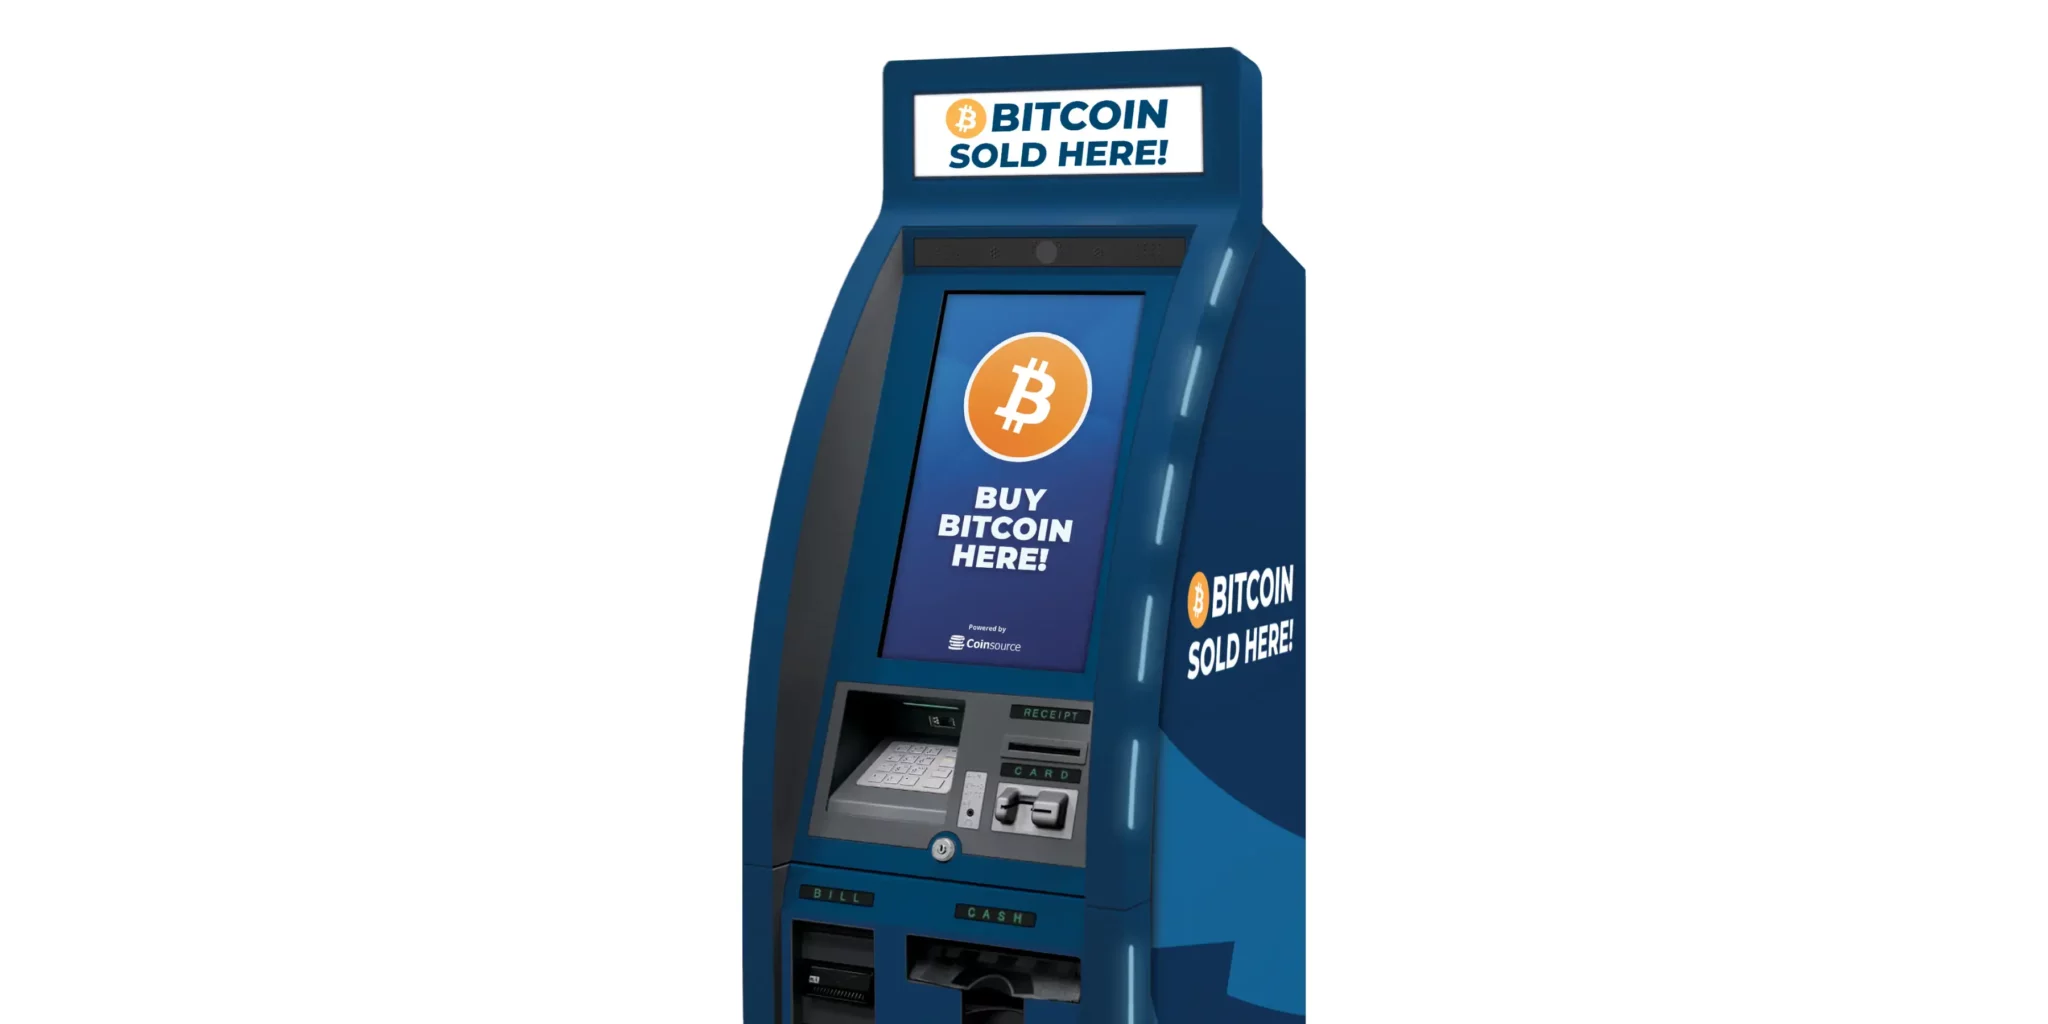 Easily Buy Bitcoin with Cash and Collect Instantly in Illinois | GetCoins - Bitcoin ATMs